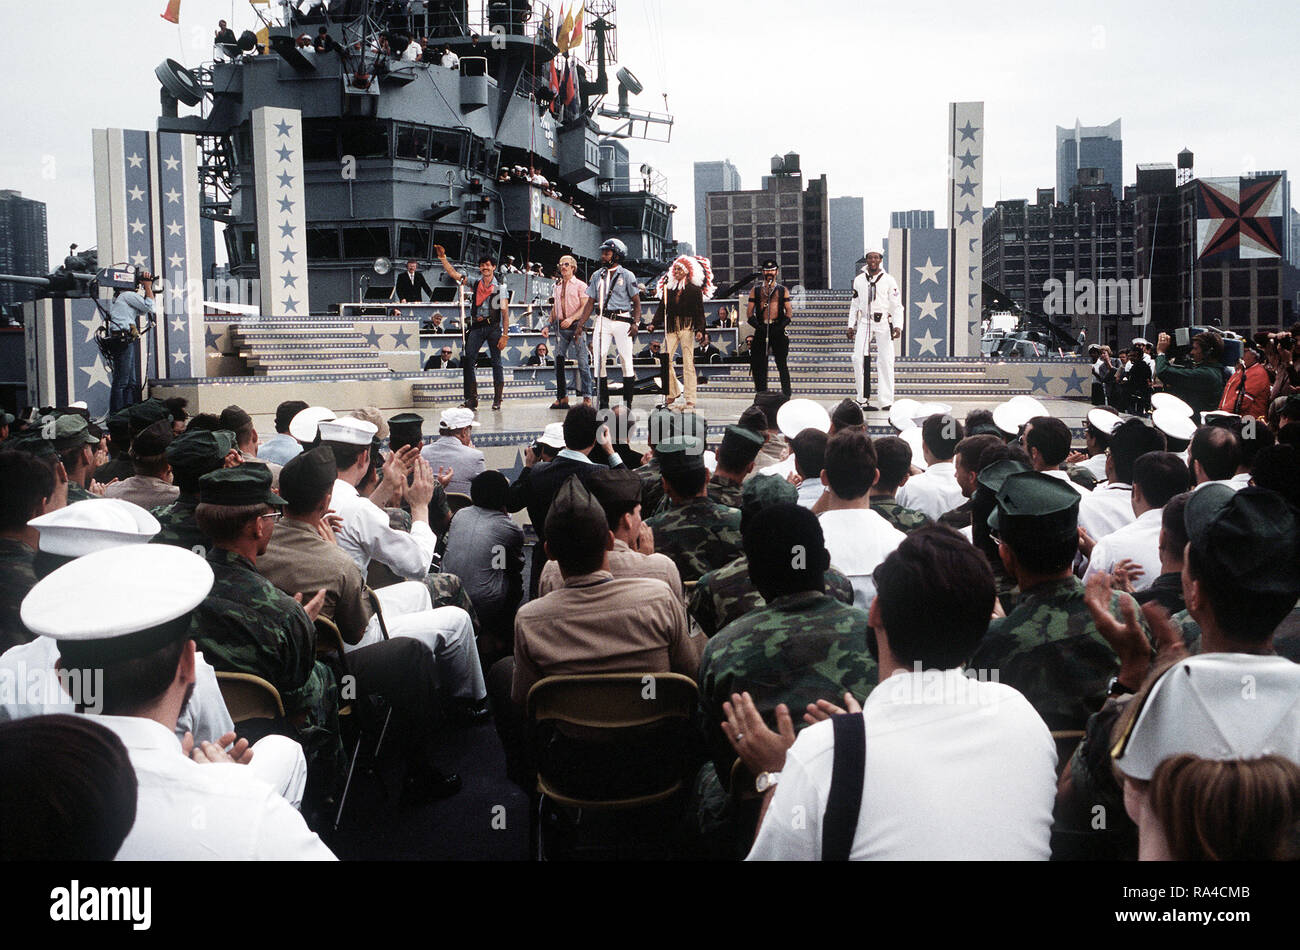 1979 - During the Bob Hope show aboard the amphibious assault ship USS IWO JIMA (LPH-2), the 'Village People' singing group sings 'YMCA'.  The ship and crew have just completed a field exercise in Puerto Rico. Stock Photo